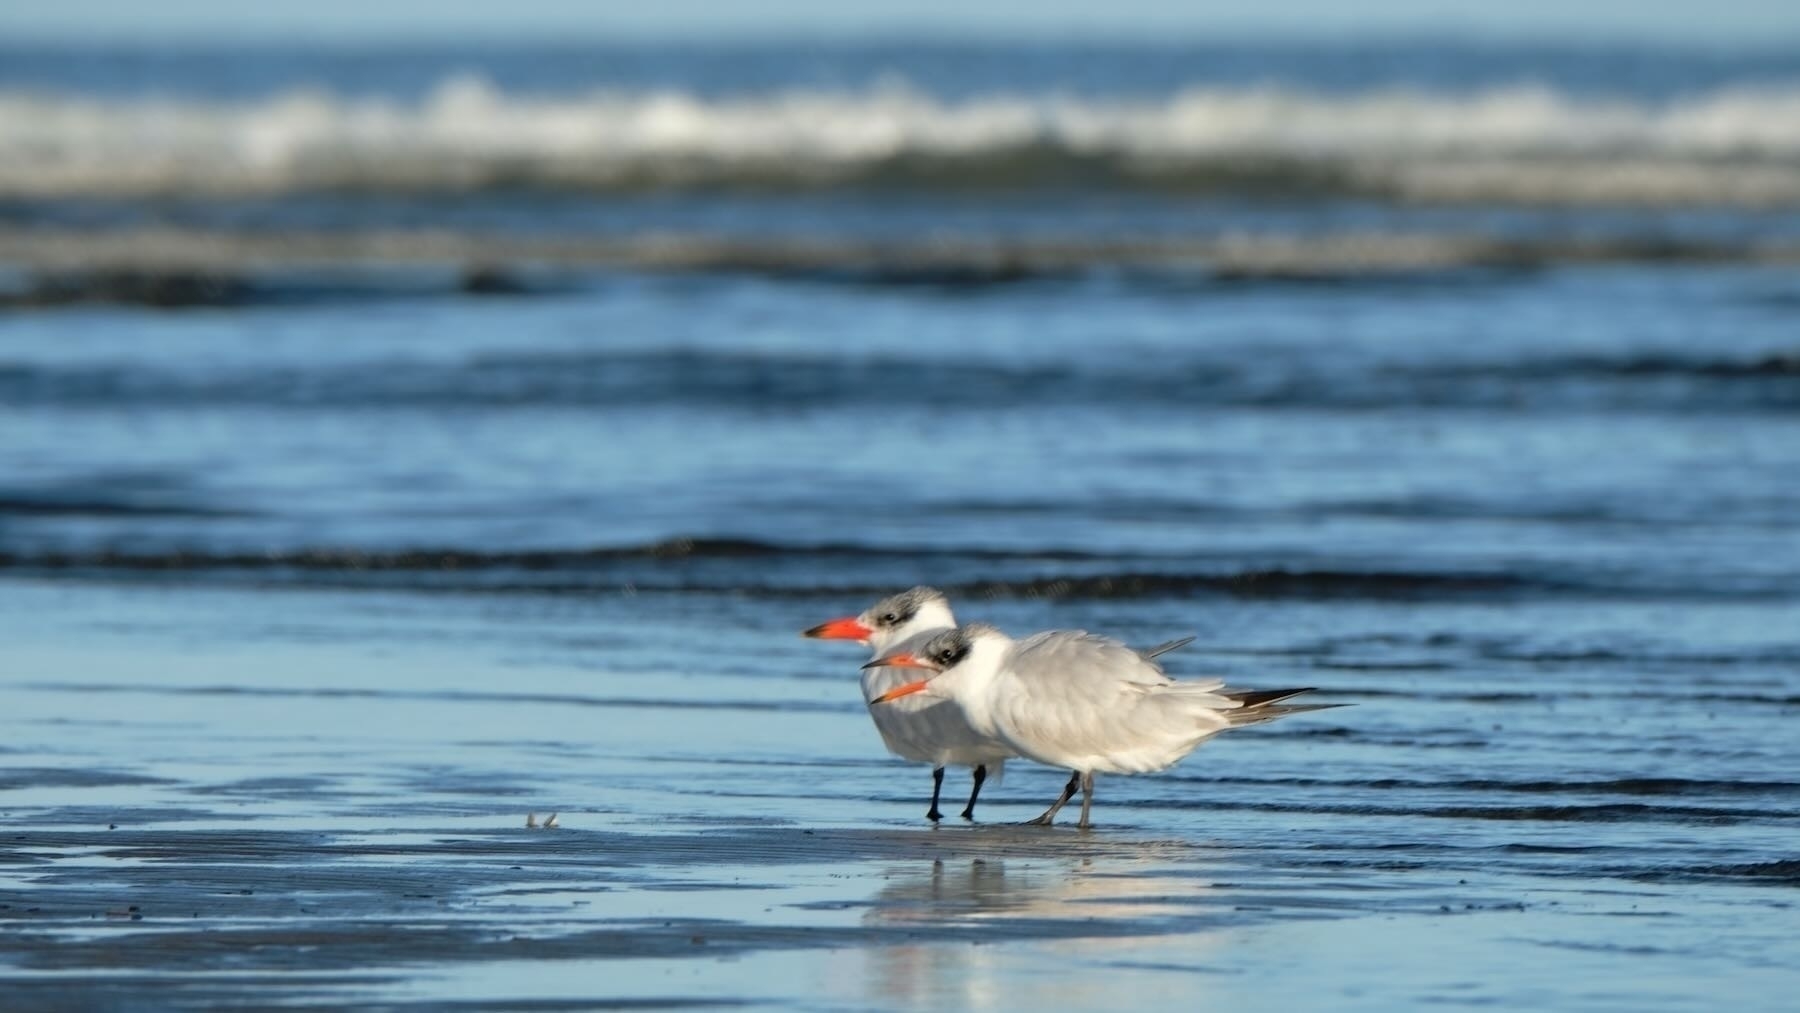 Two Caspian terns on the beach with sea behind. 